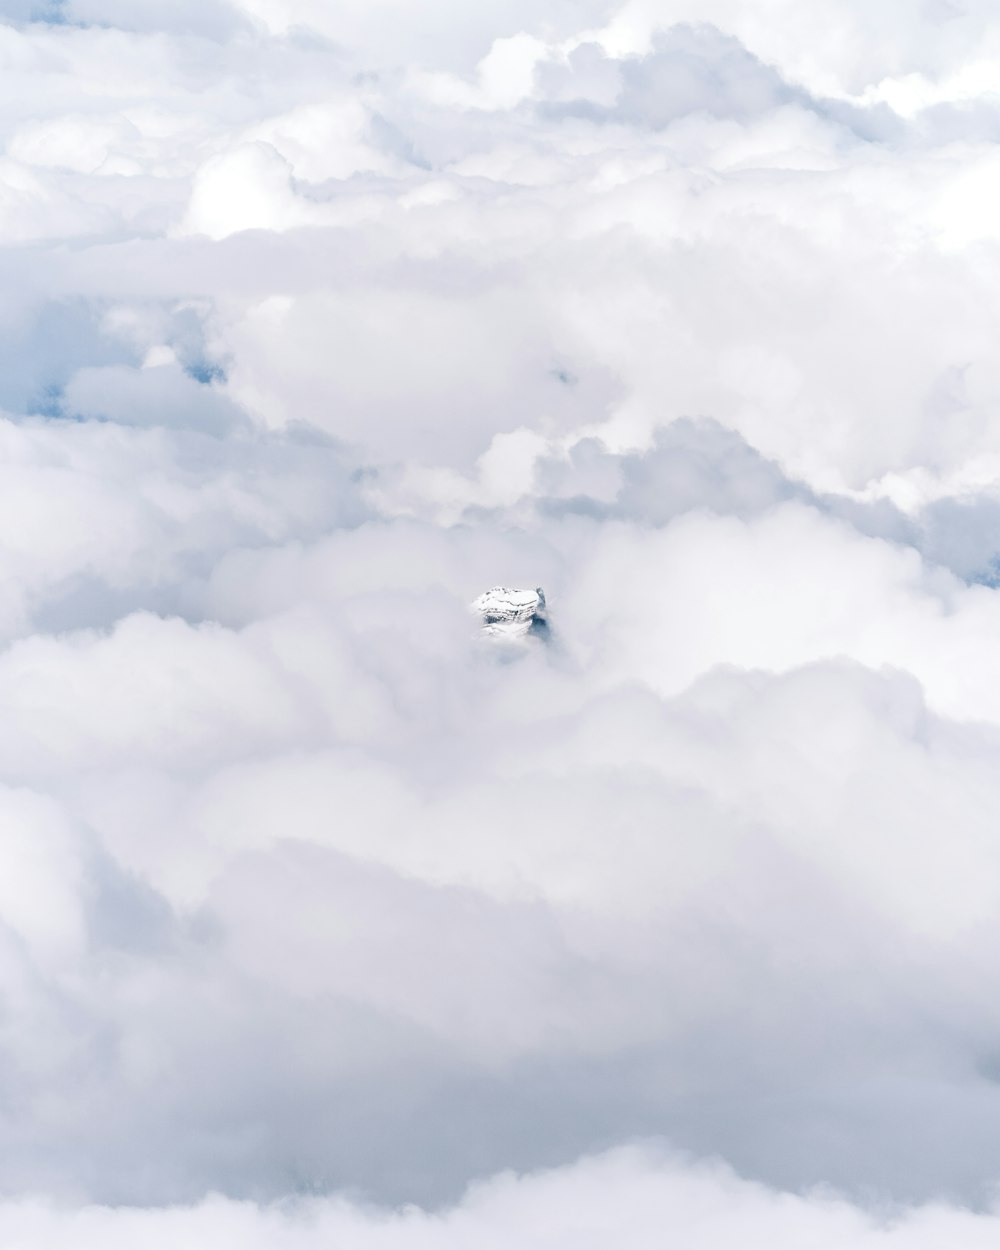 white airplane on mid air under white clouds during daytime